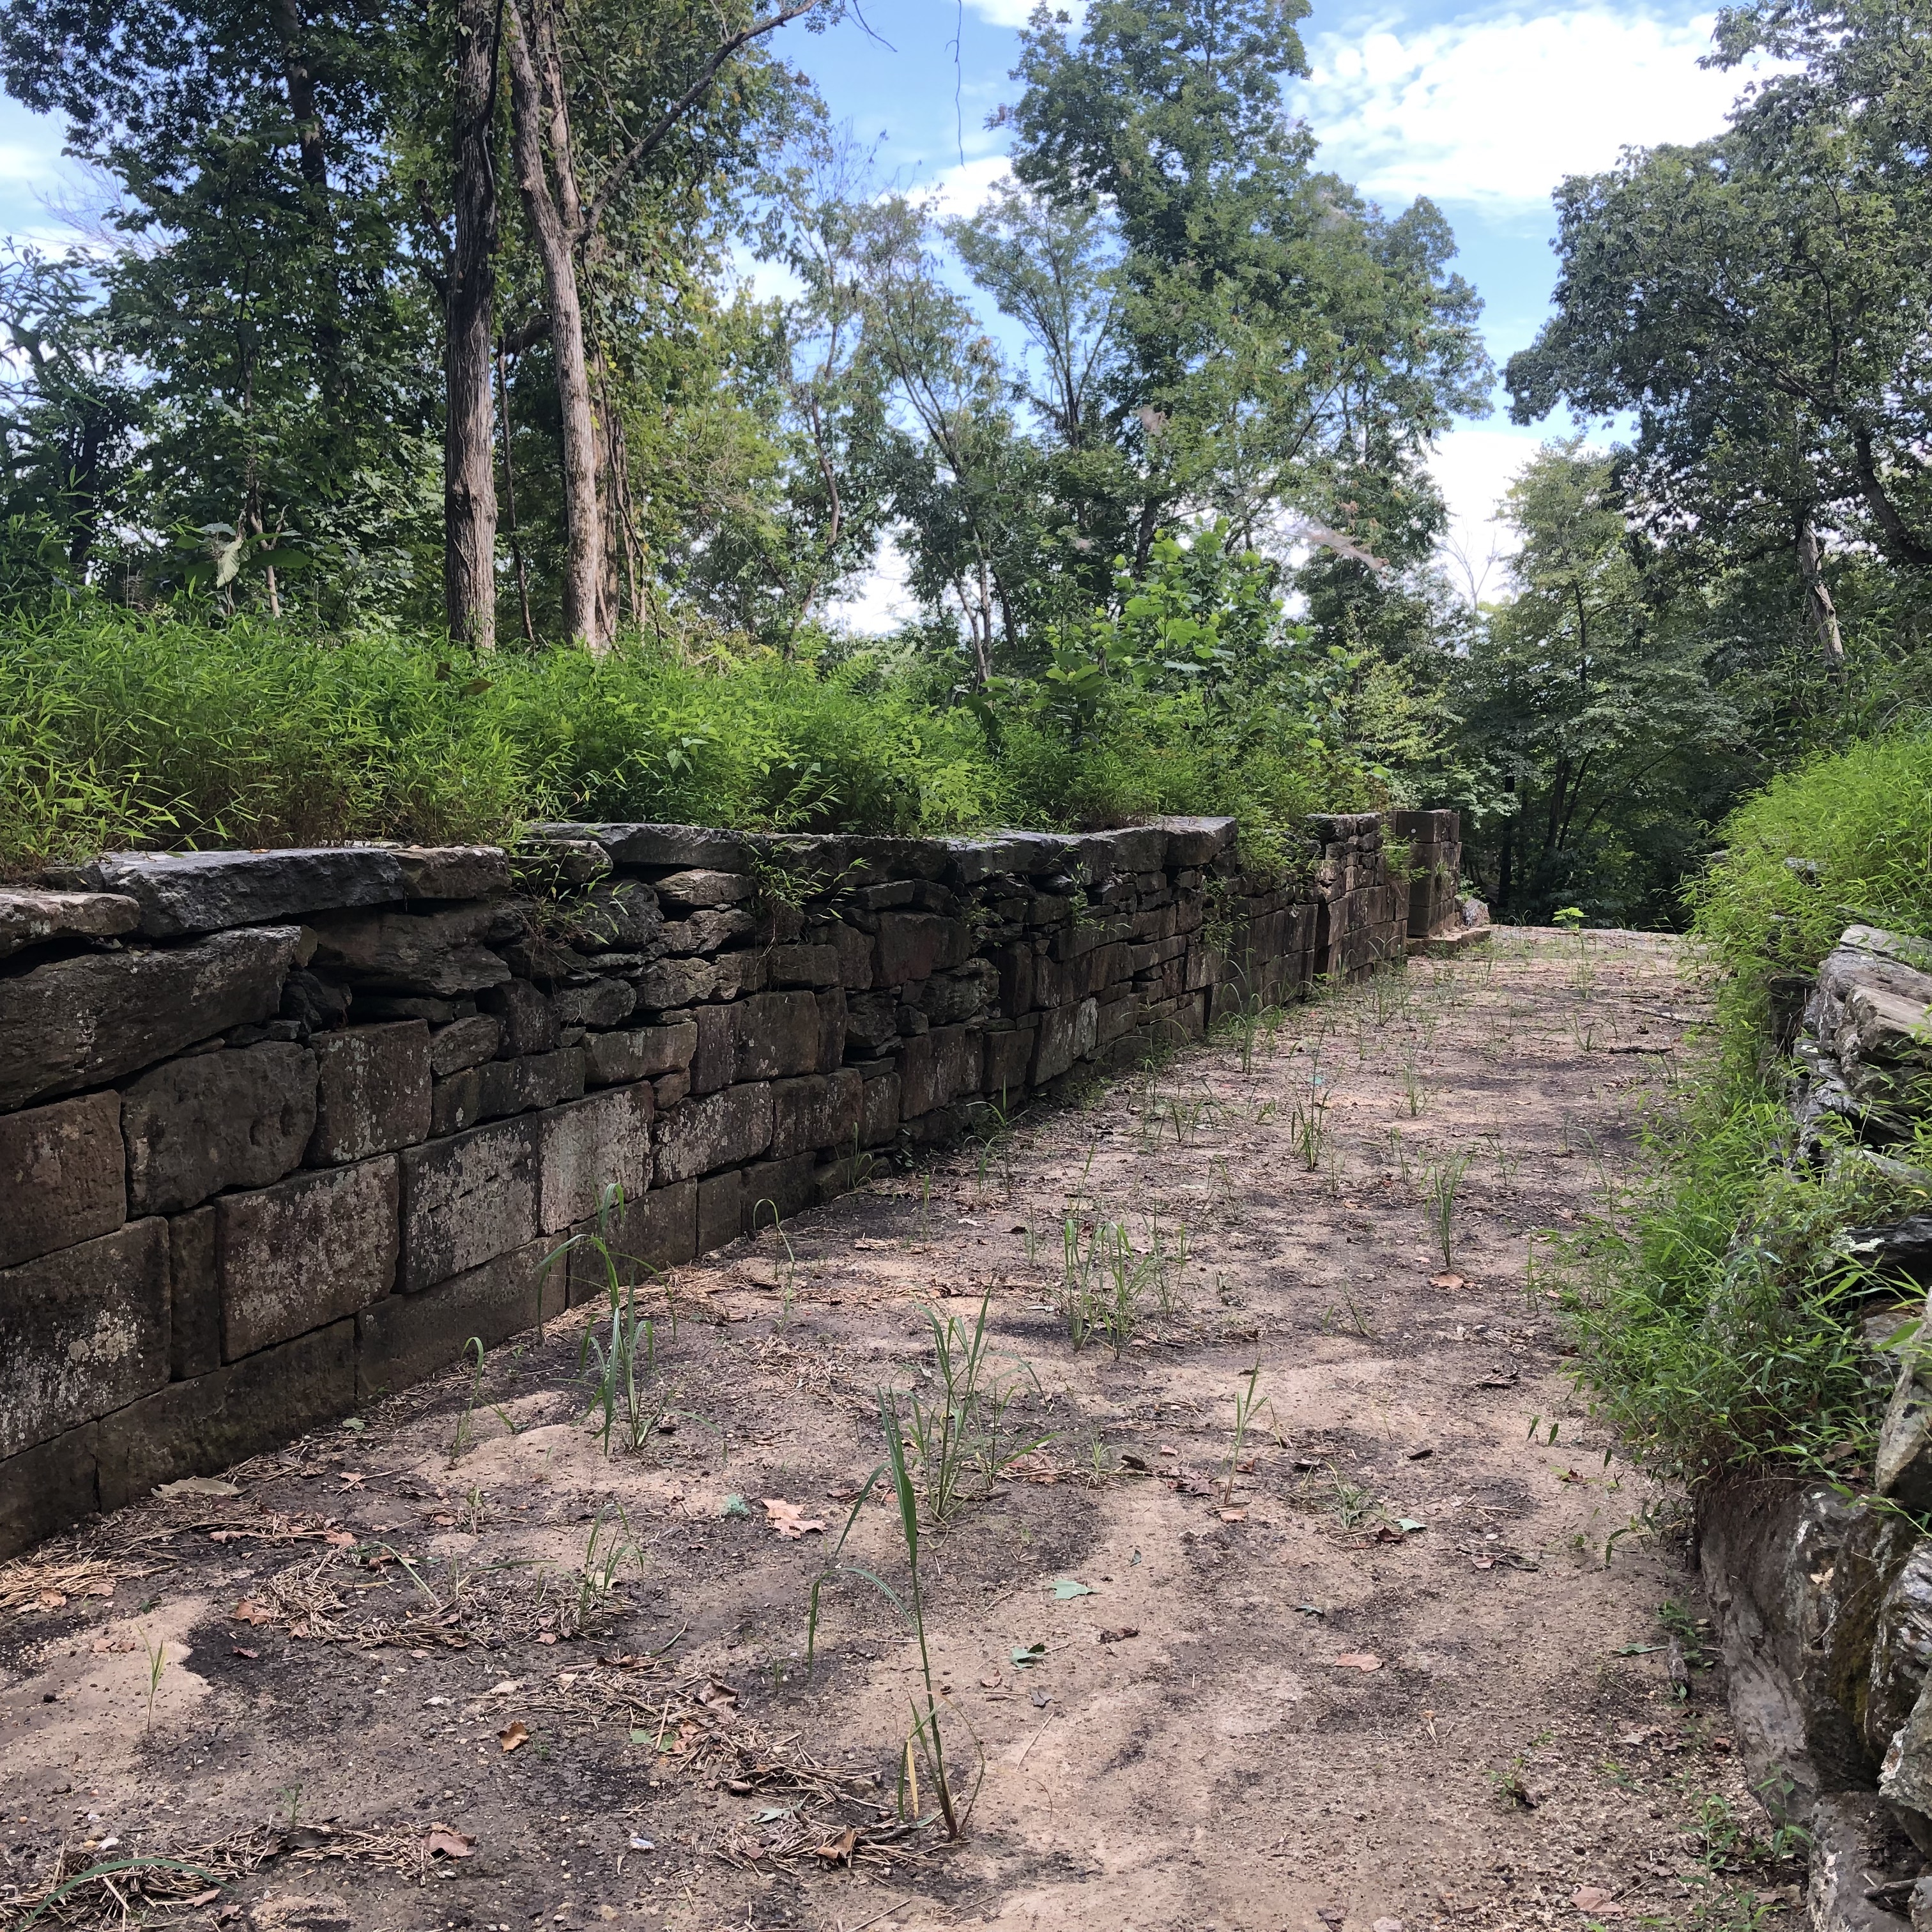 Remains of a canal at Great Falls